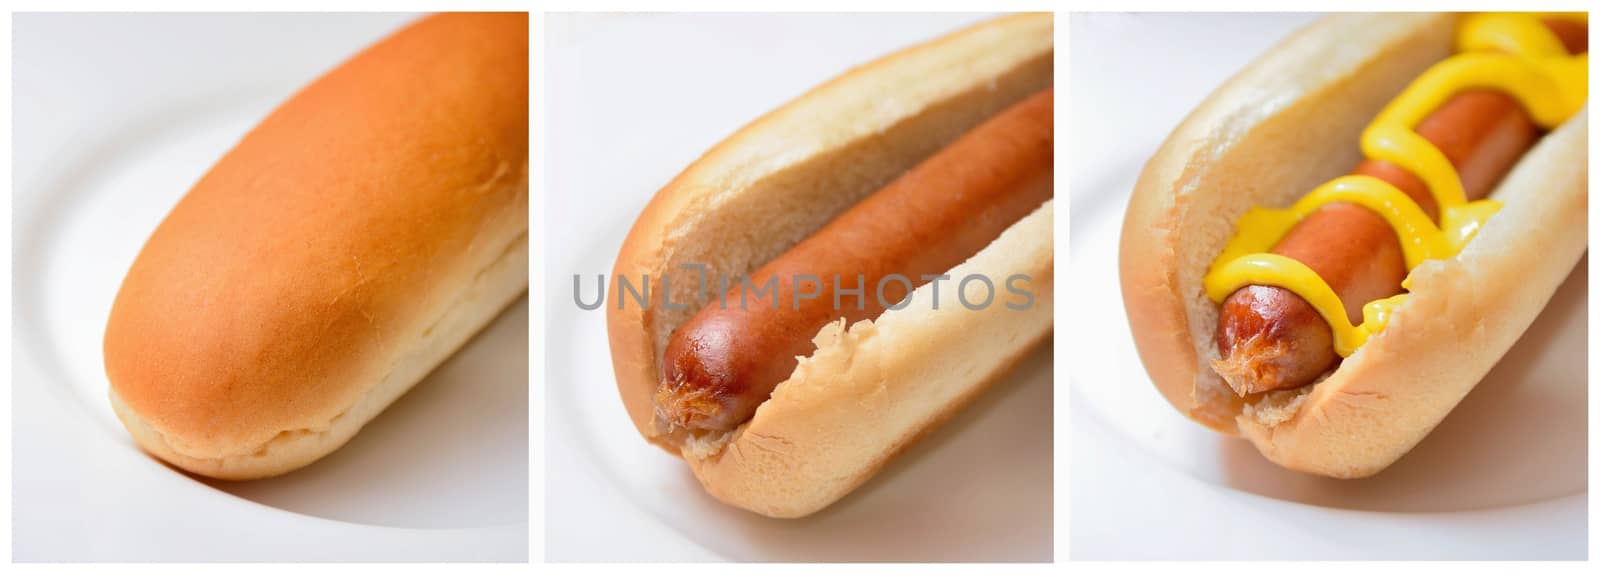 Photo collage with three images of hot dog, soft bun and hot dog with mustard.